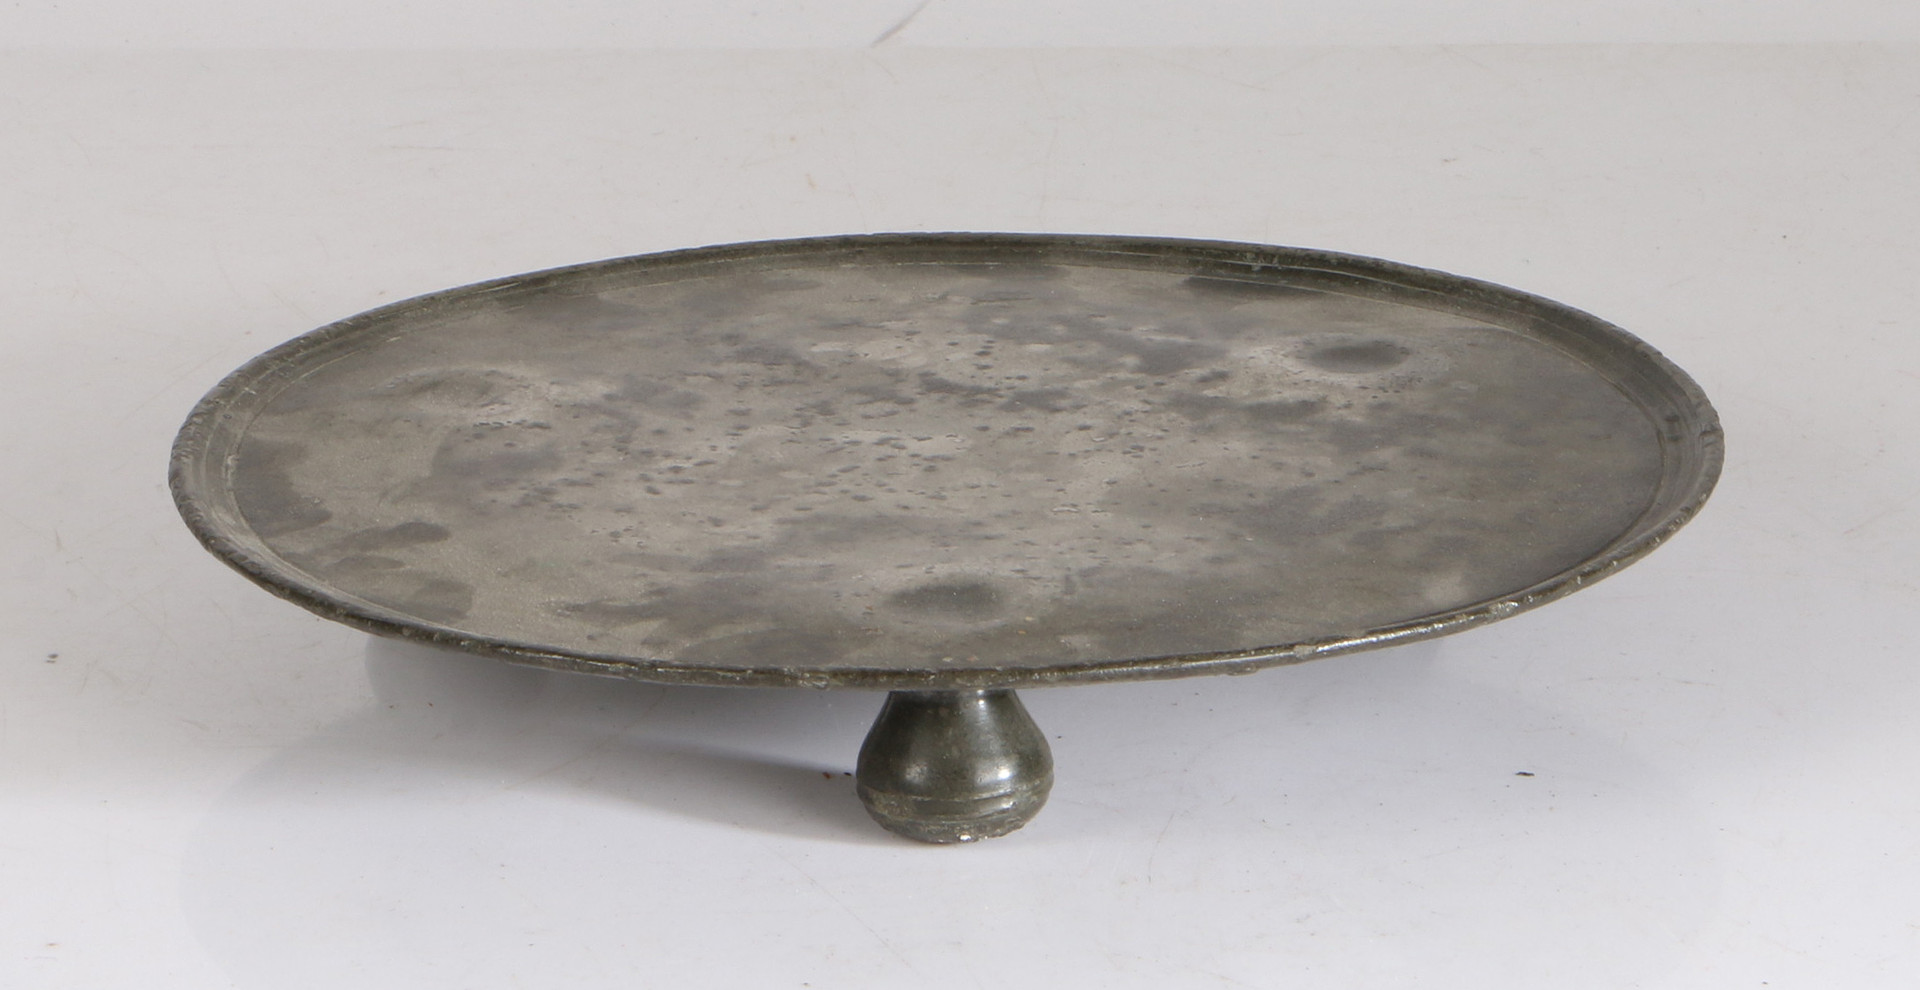 A RARE CHARLES II PEWTER FOOTED PLATE OR TAZZA, CIRCA 1660-80.